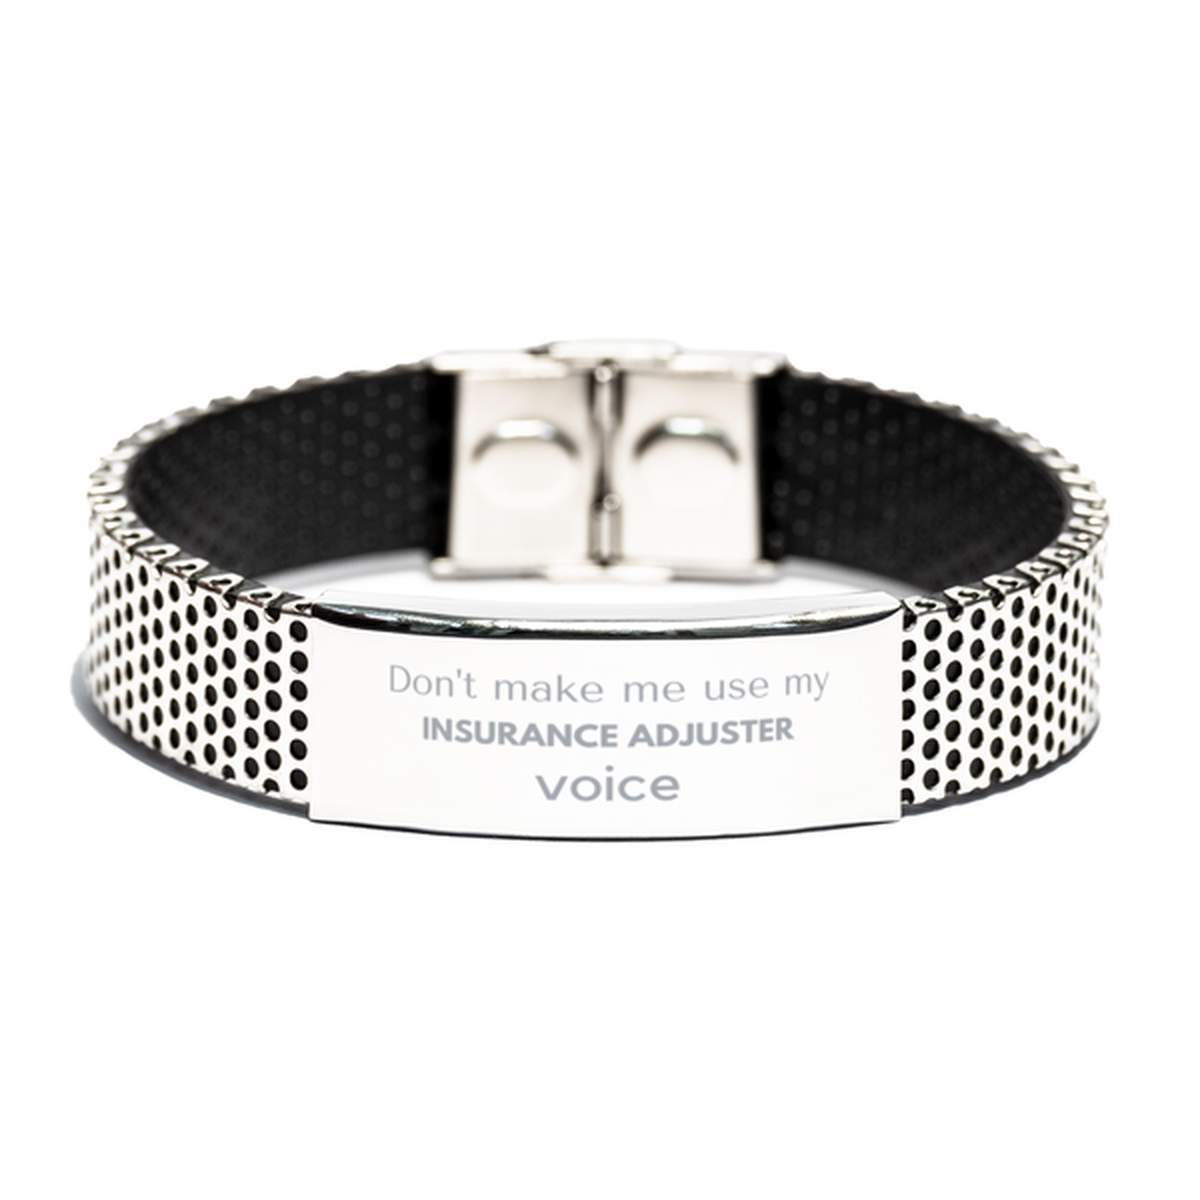 Don't make me use my Insurance Adjuster voice, Sarcasm Insurance Adjuster Gifts, Christmas Insurance Adjuster Stainless Steel Bracelet Birthday Unique Gifts For Insurance Adjuster Coworkers, Men, Women, Colleague, Friends